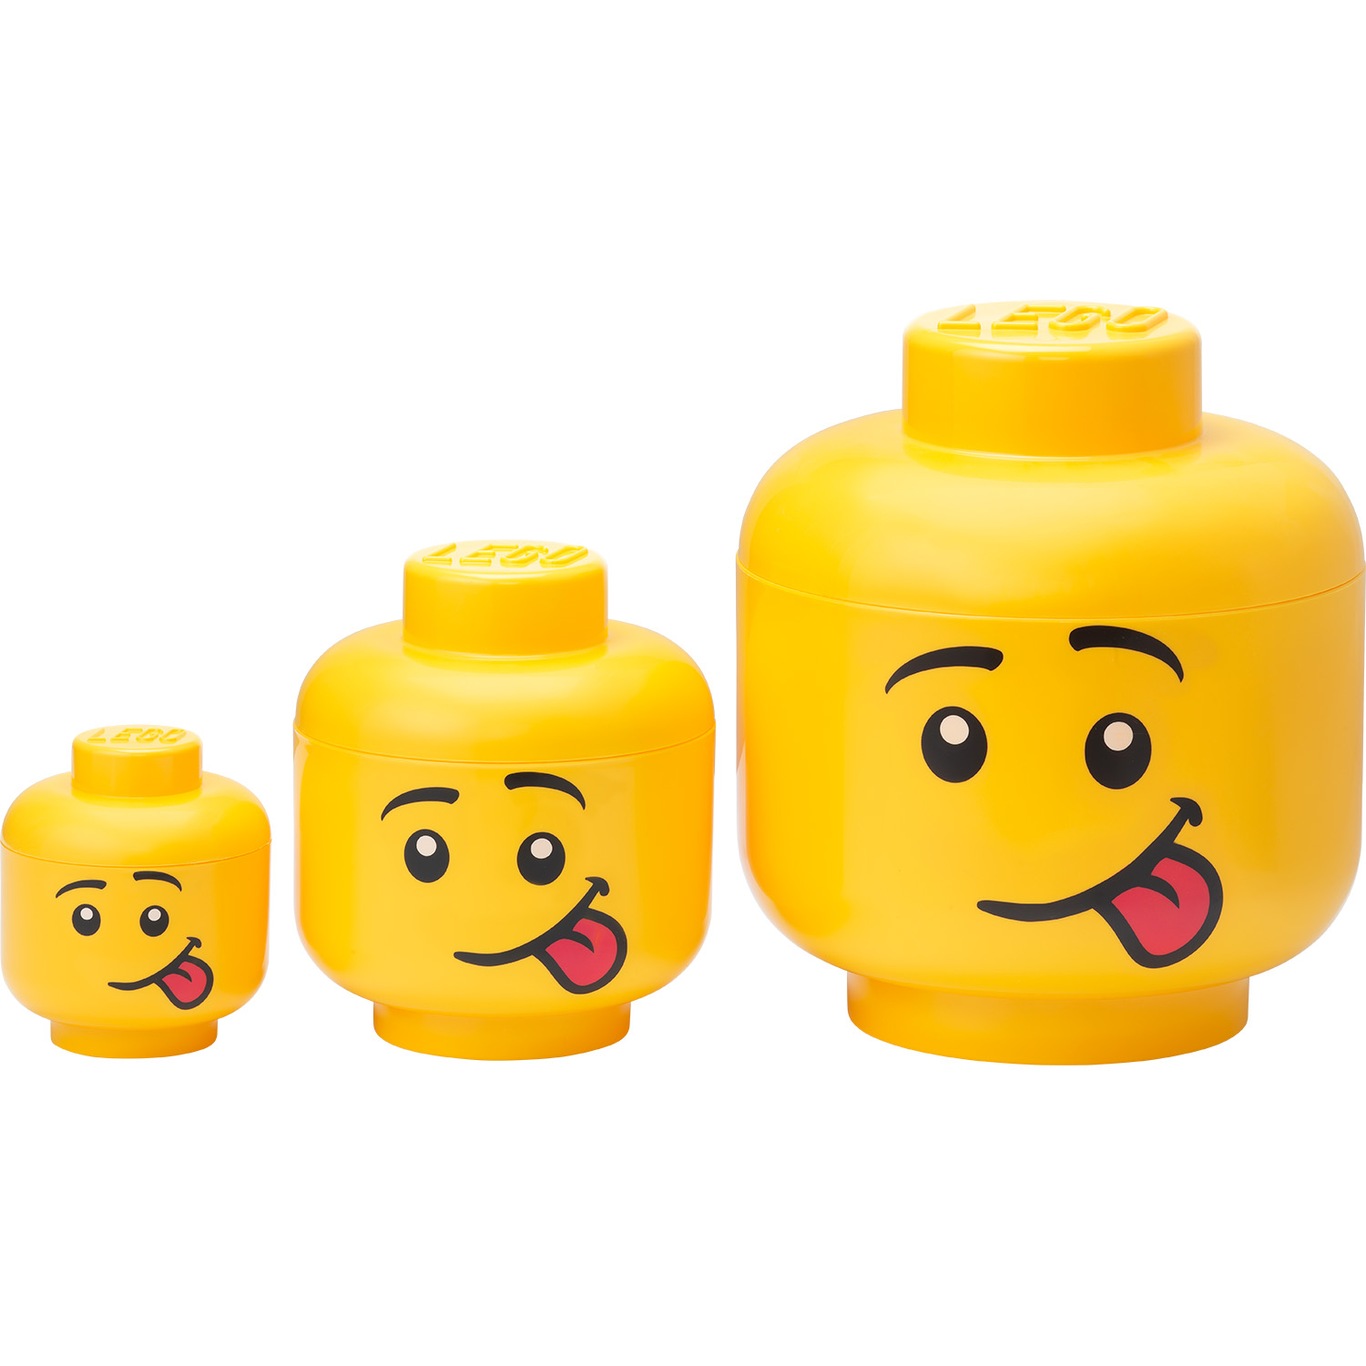 LEGO® Storage Box Head Collection 3 Pieces, Silly